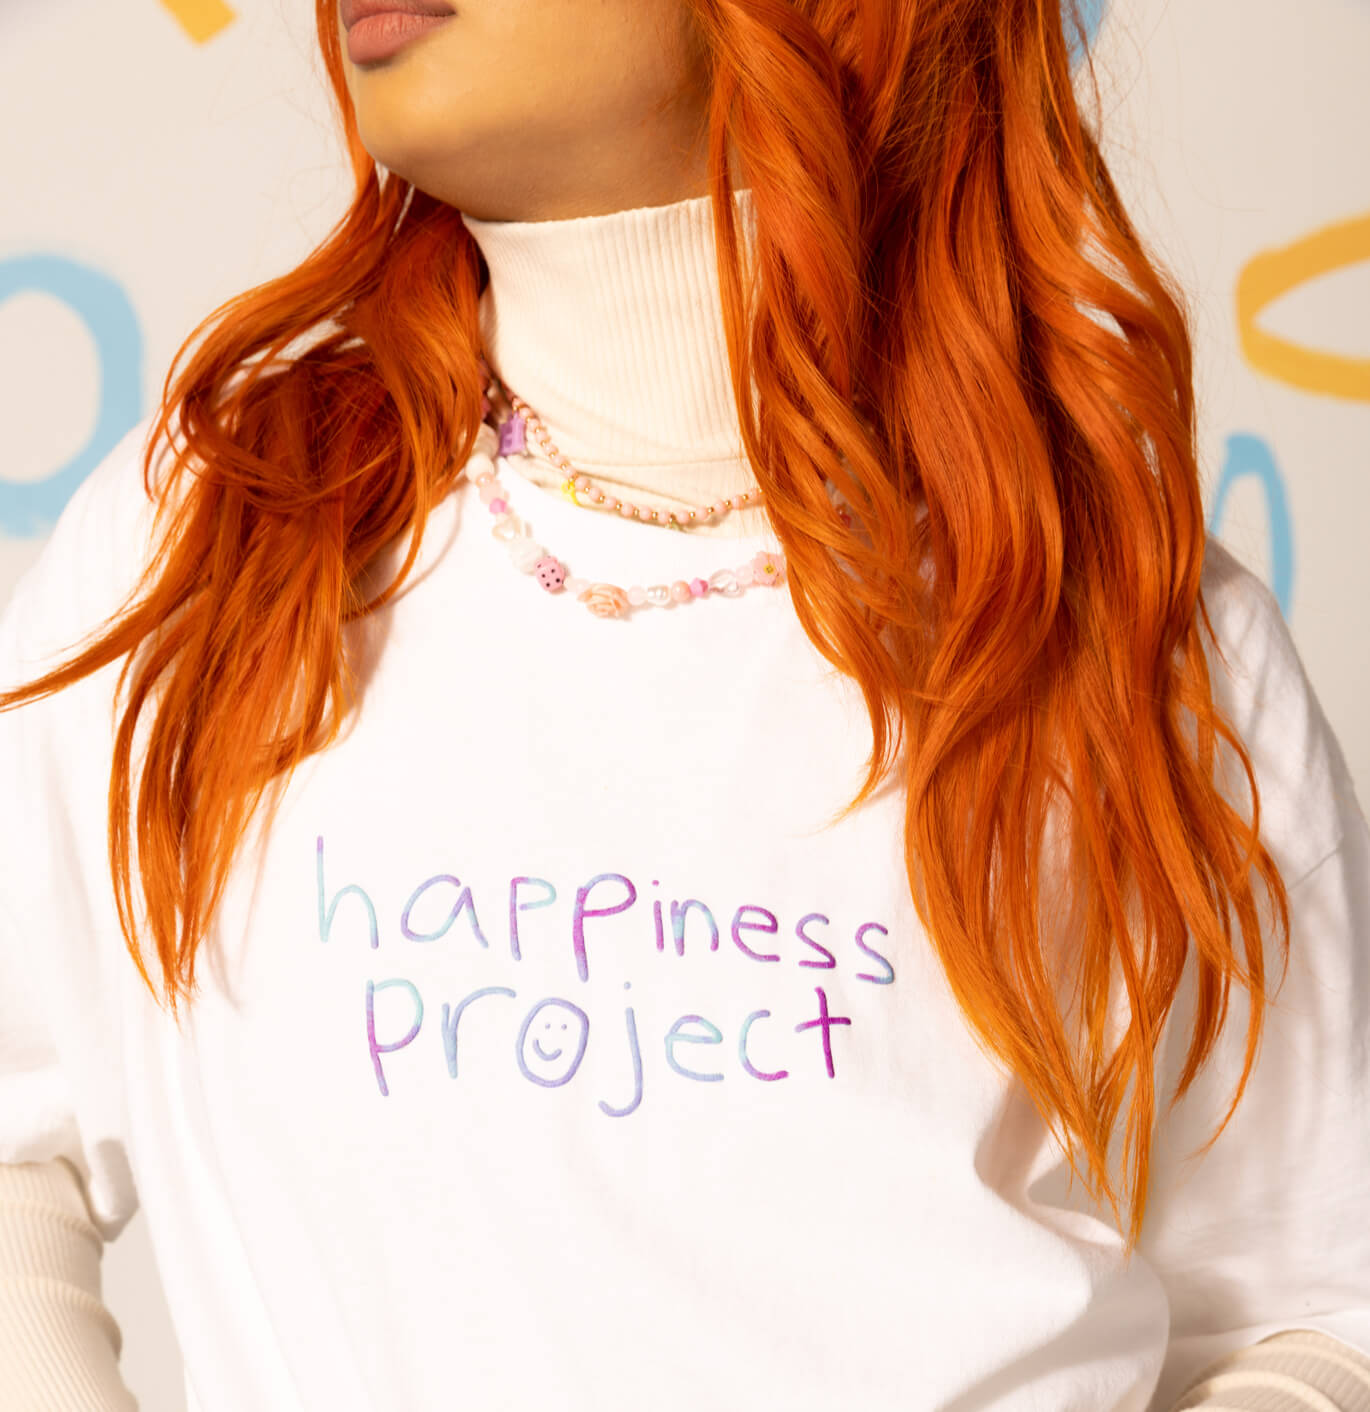 Model wearing TOMS X Happiness Project hoodie shown.